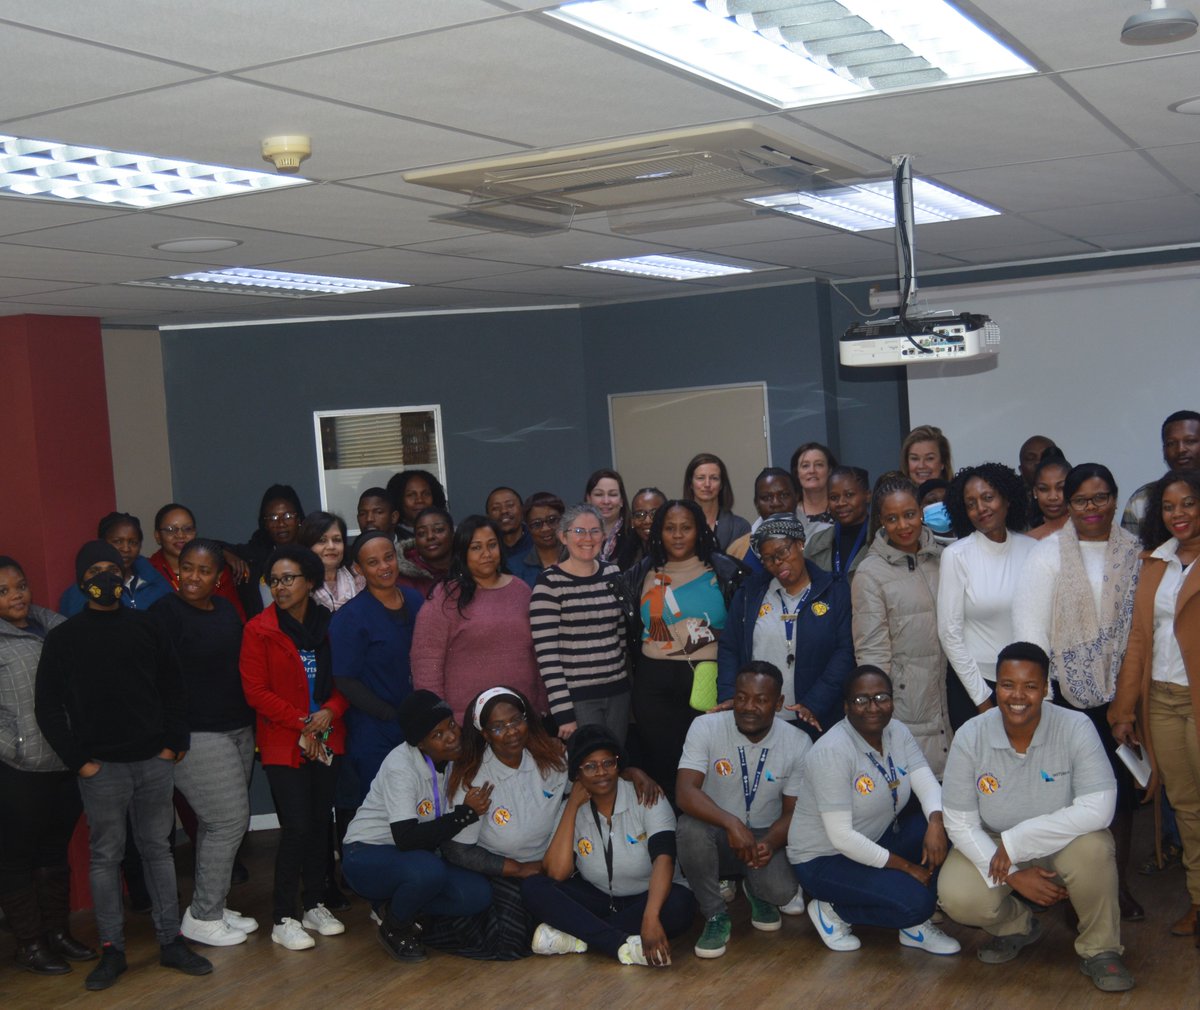 Great News! The first patient was recently recruited and randomised on the panTB-HM trial at the activated CHRU site in Johannesburg. #ClinicalTrials #TB